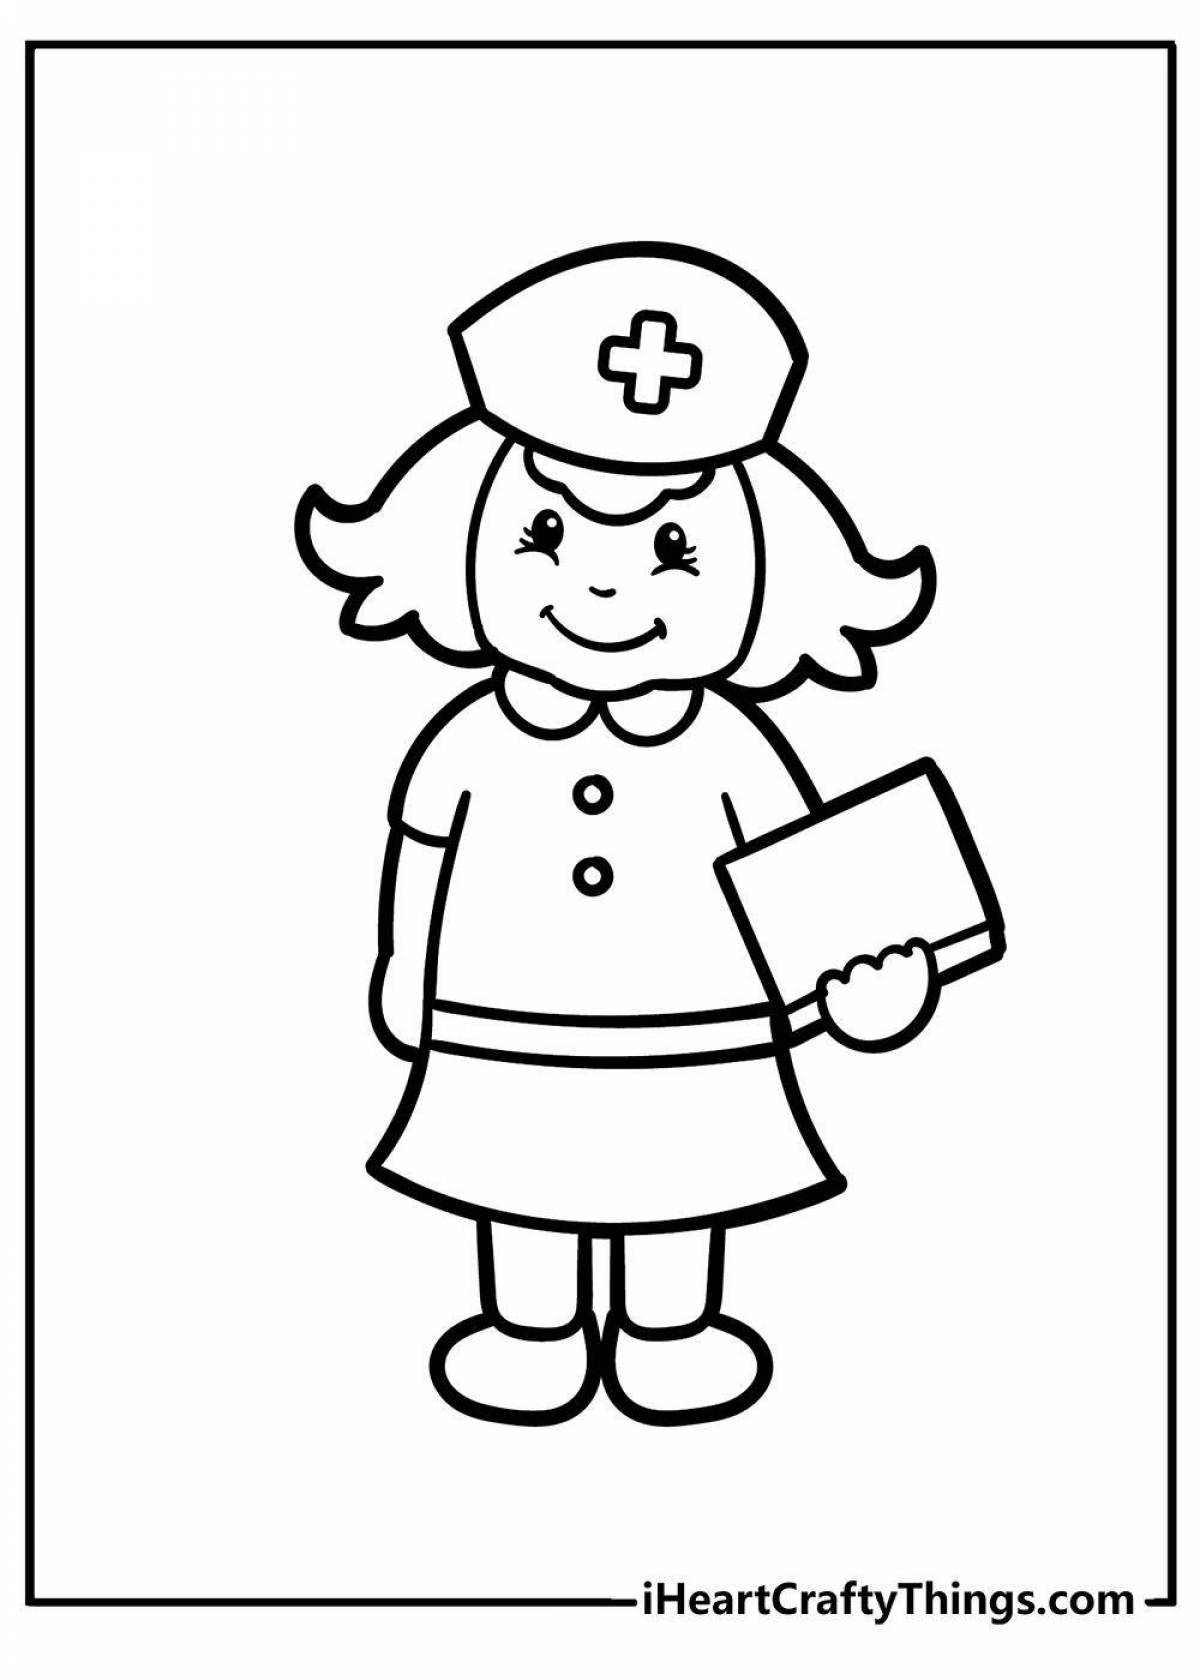 Colorful military nurse coloring book for kids